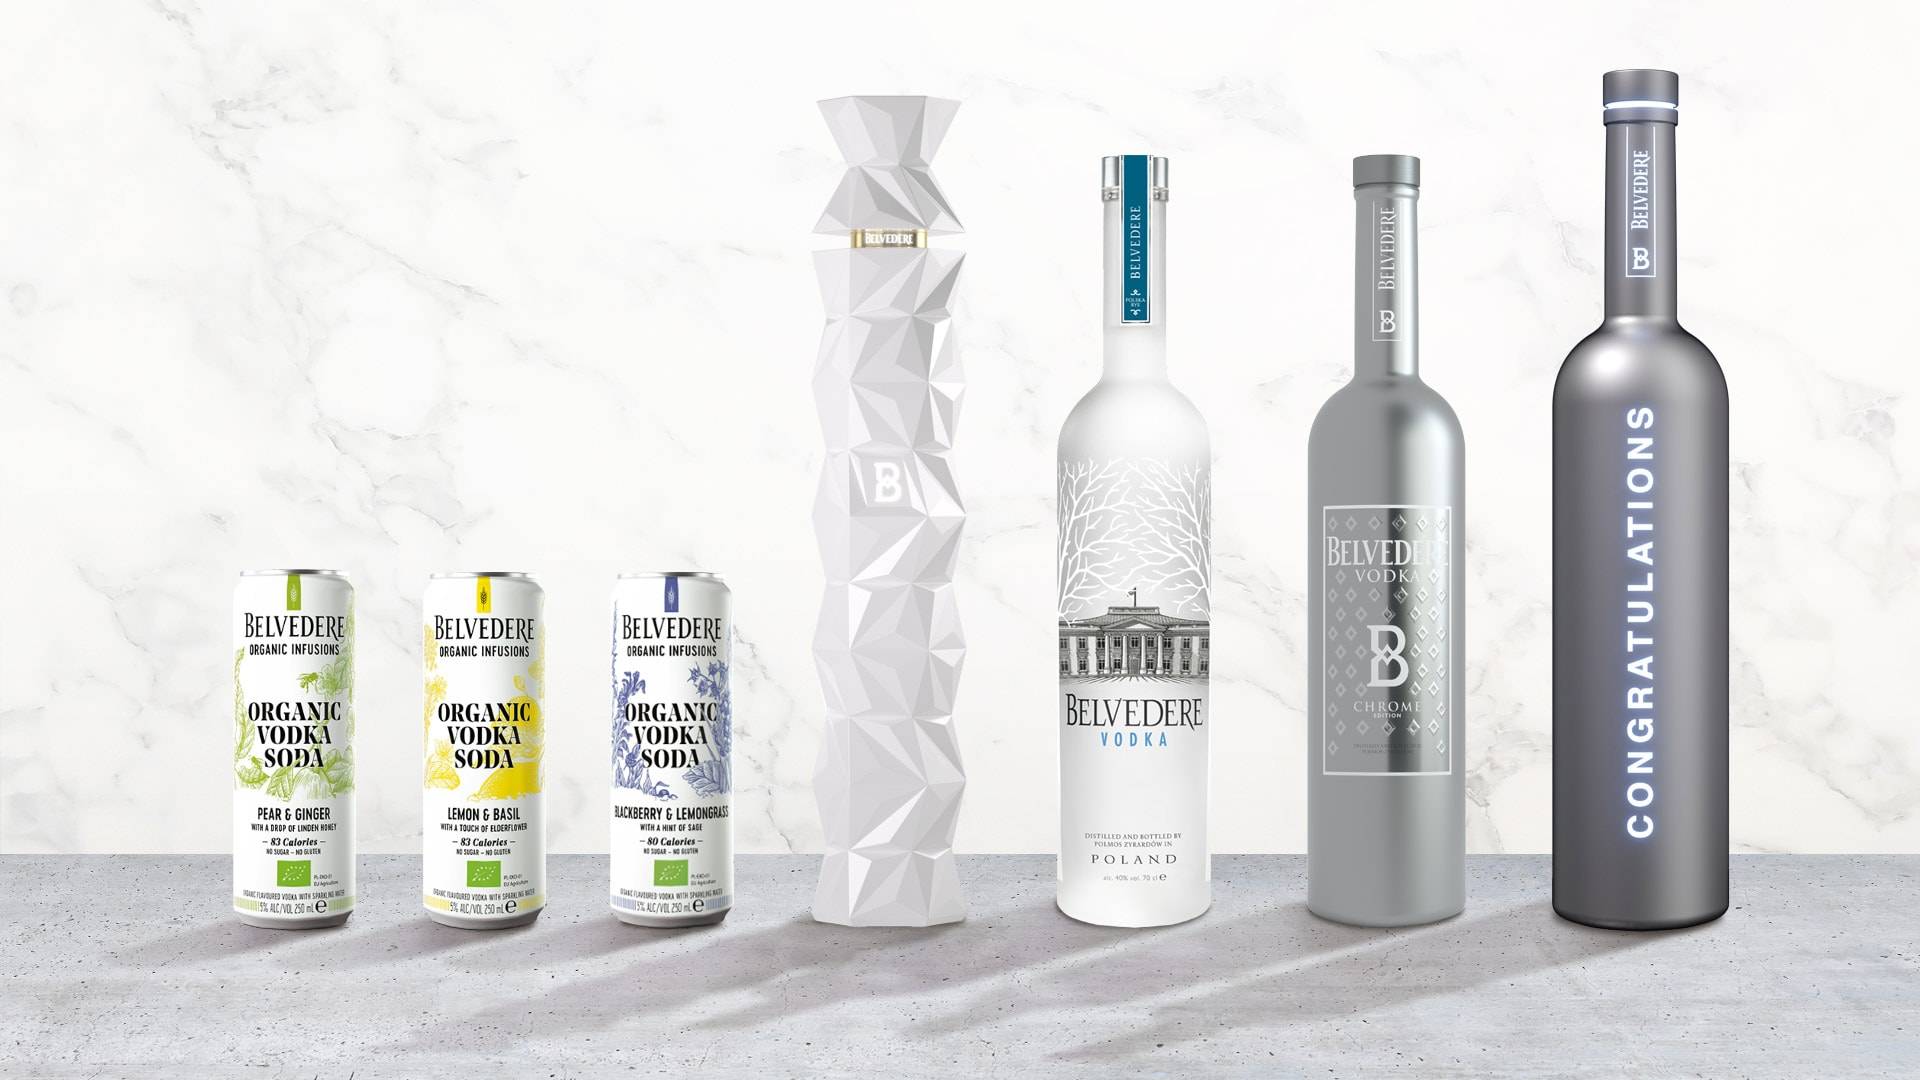 Belvedere’s diverse collection of luxurious vodkas